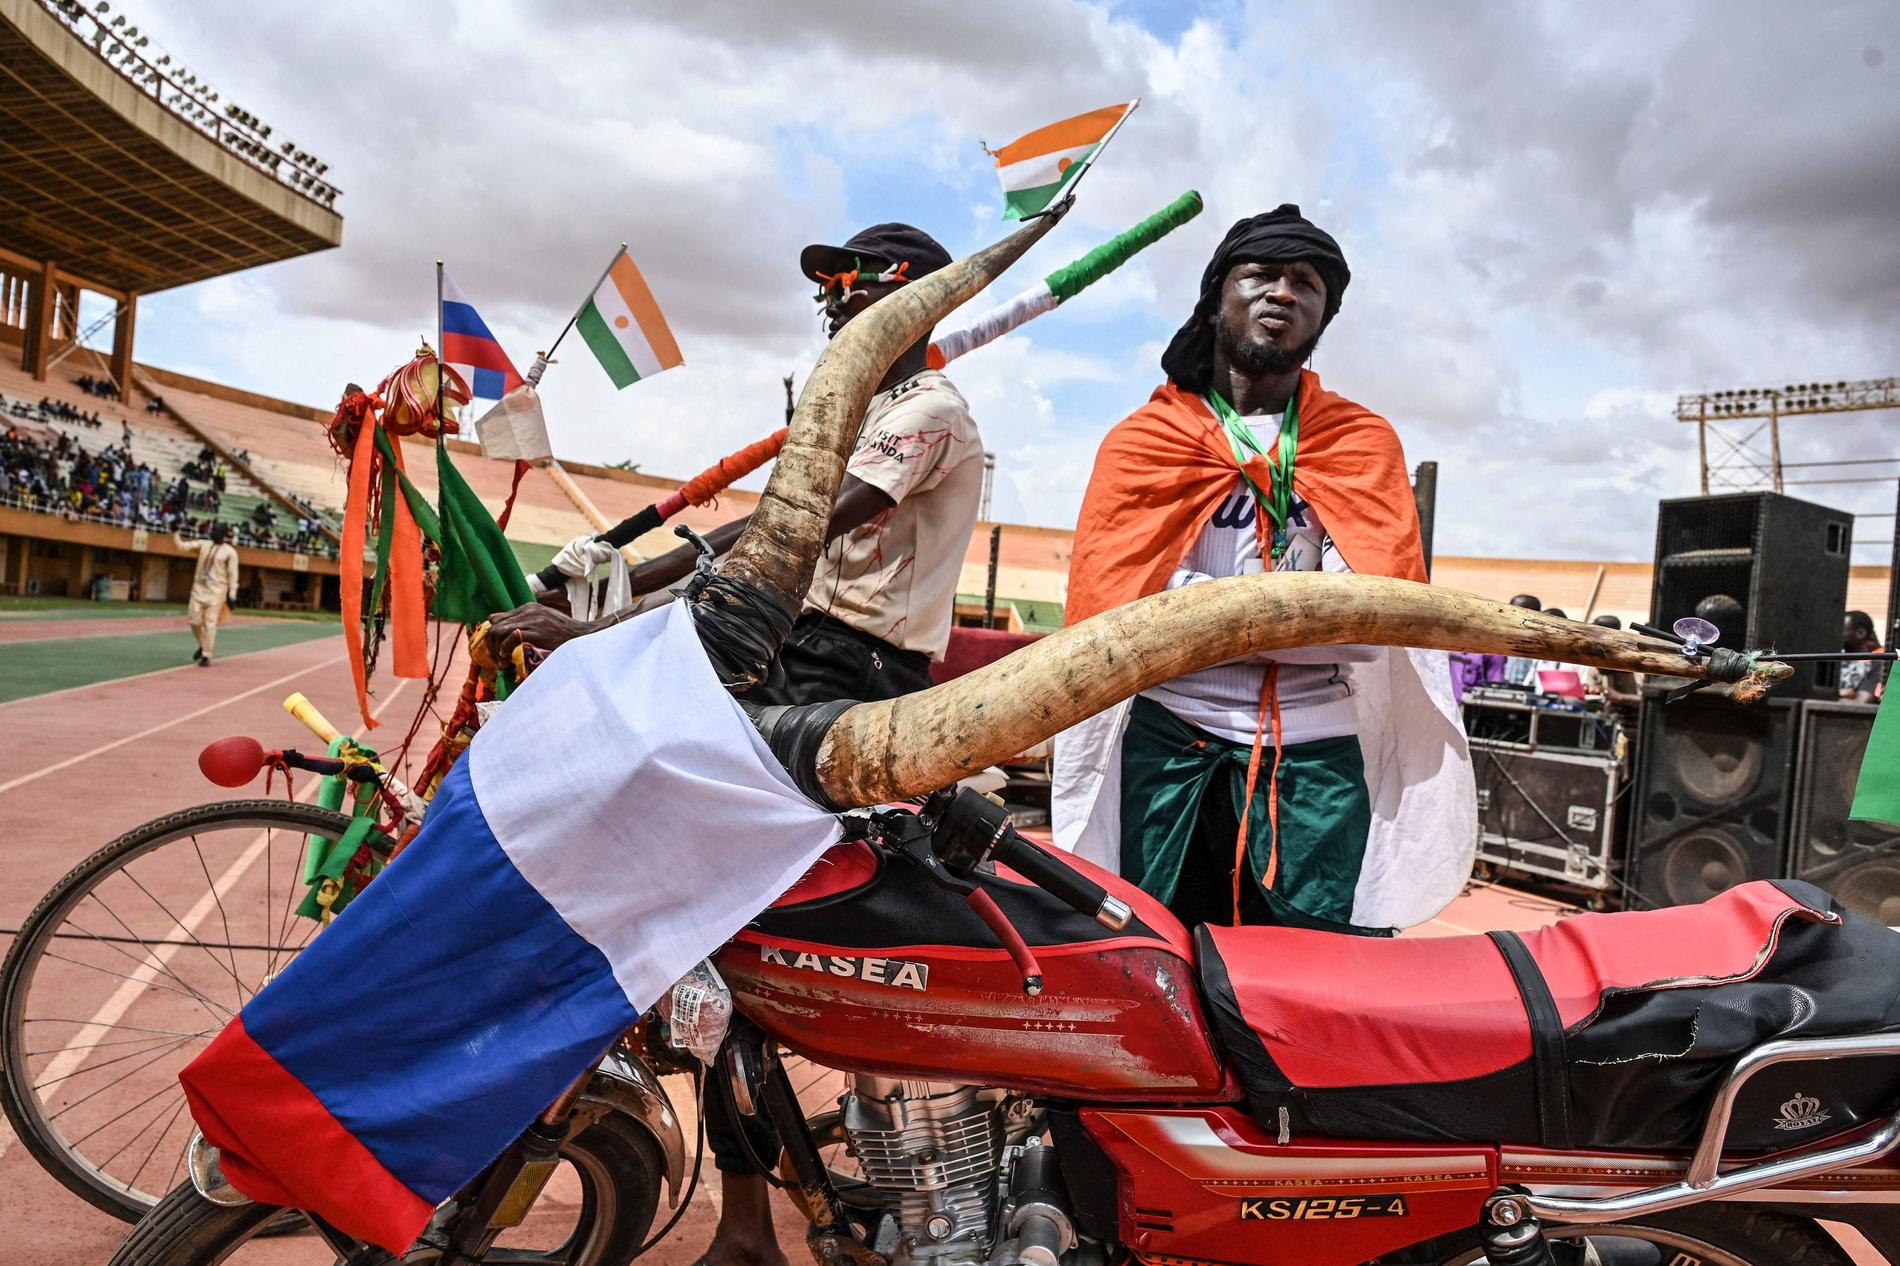 National Pride: A motorcycle in Niger is decorated with traditional zebu horns and the Russian flag.